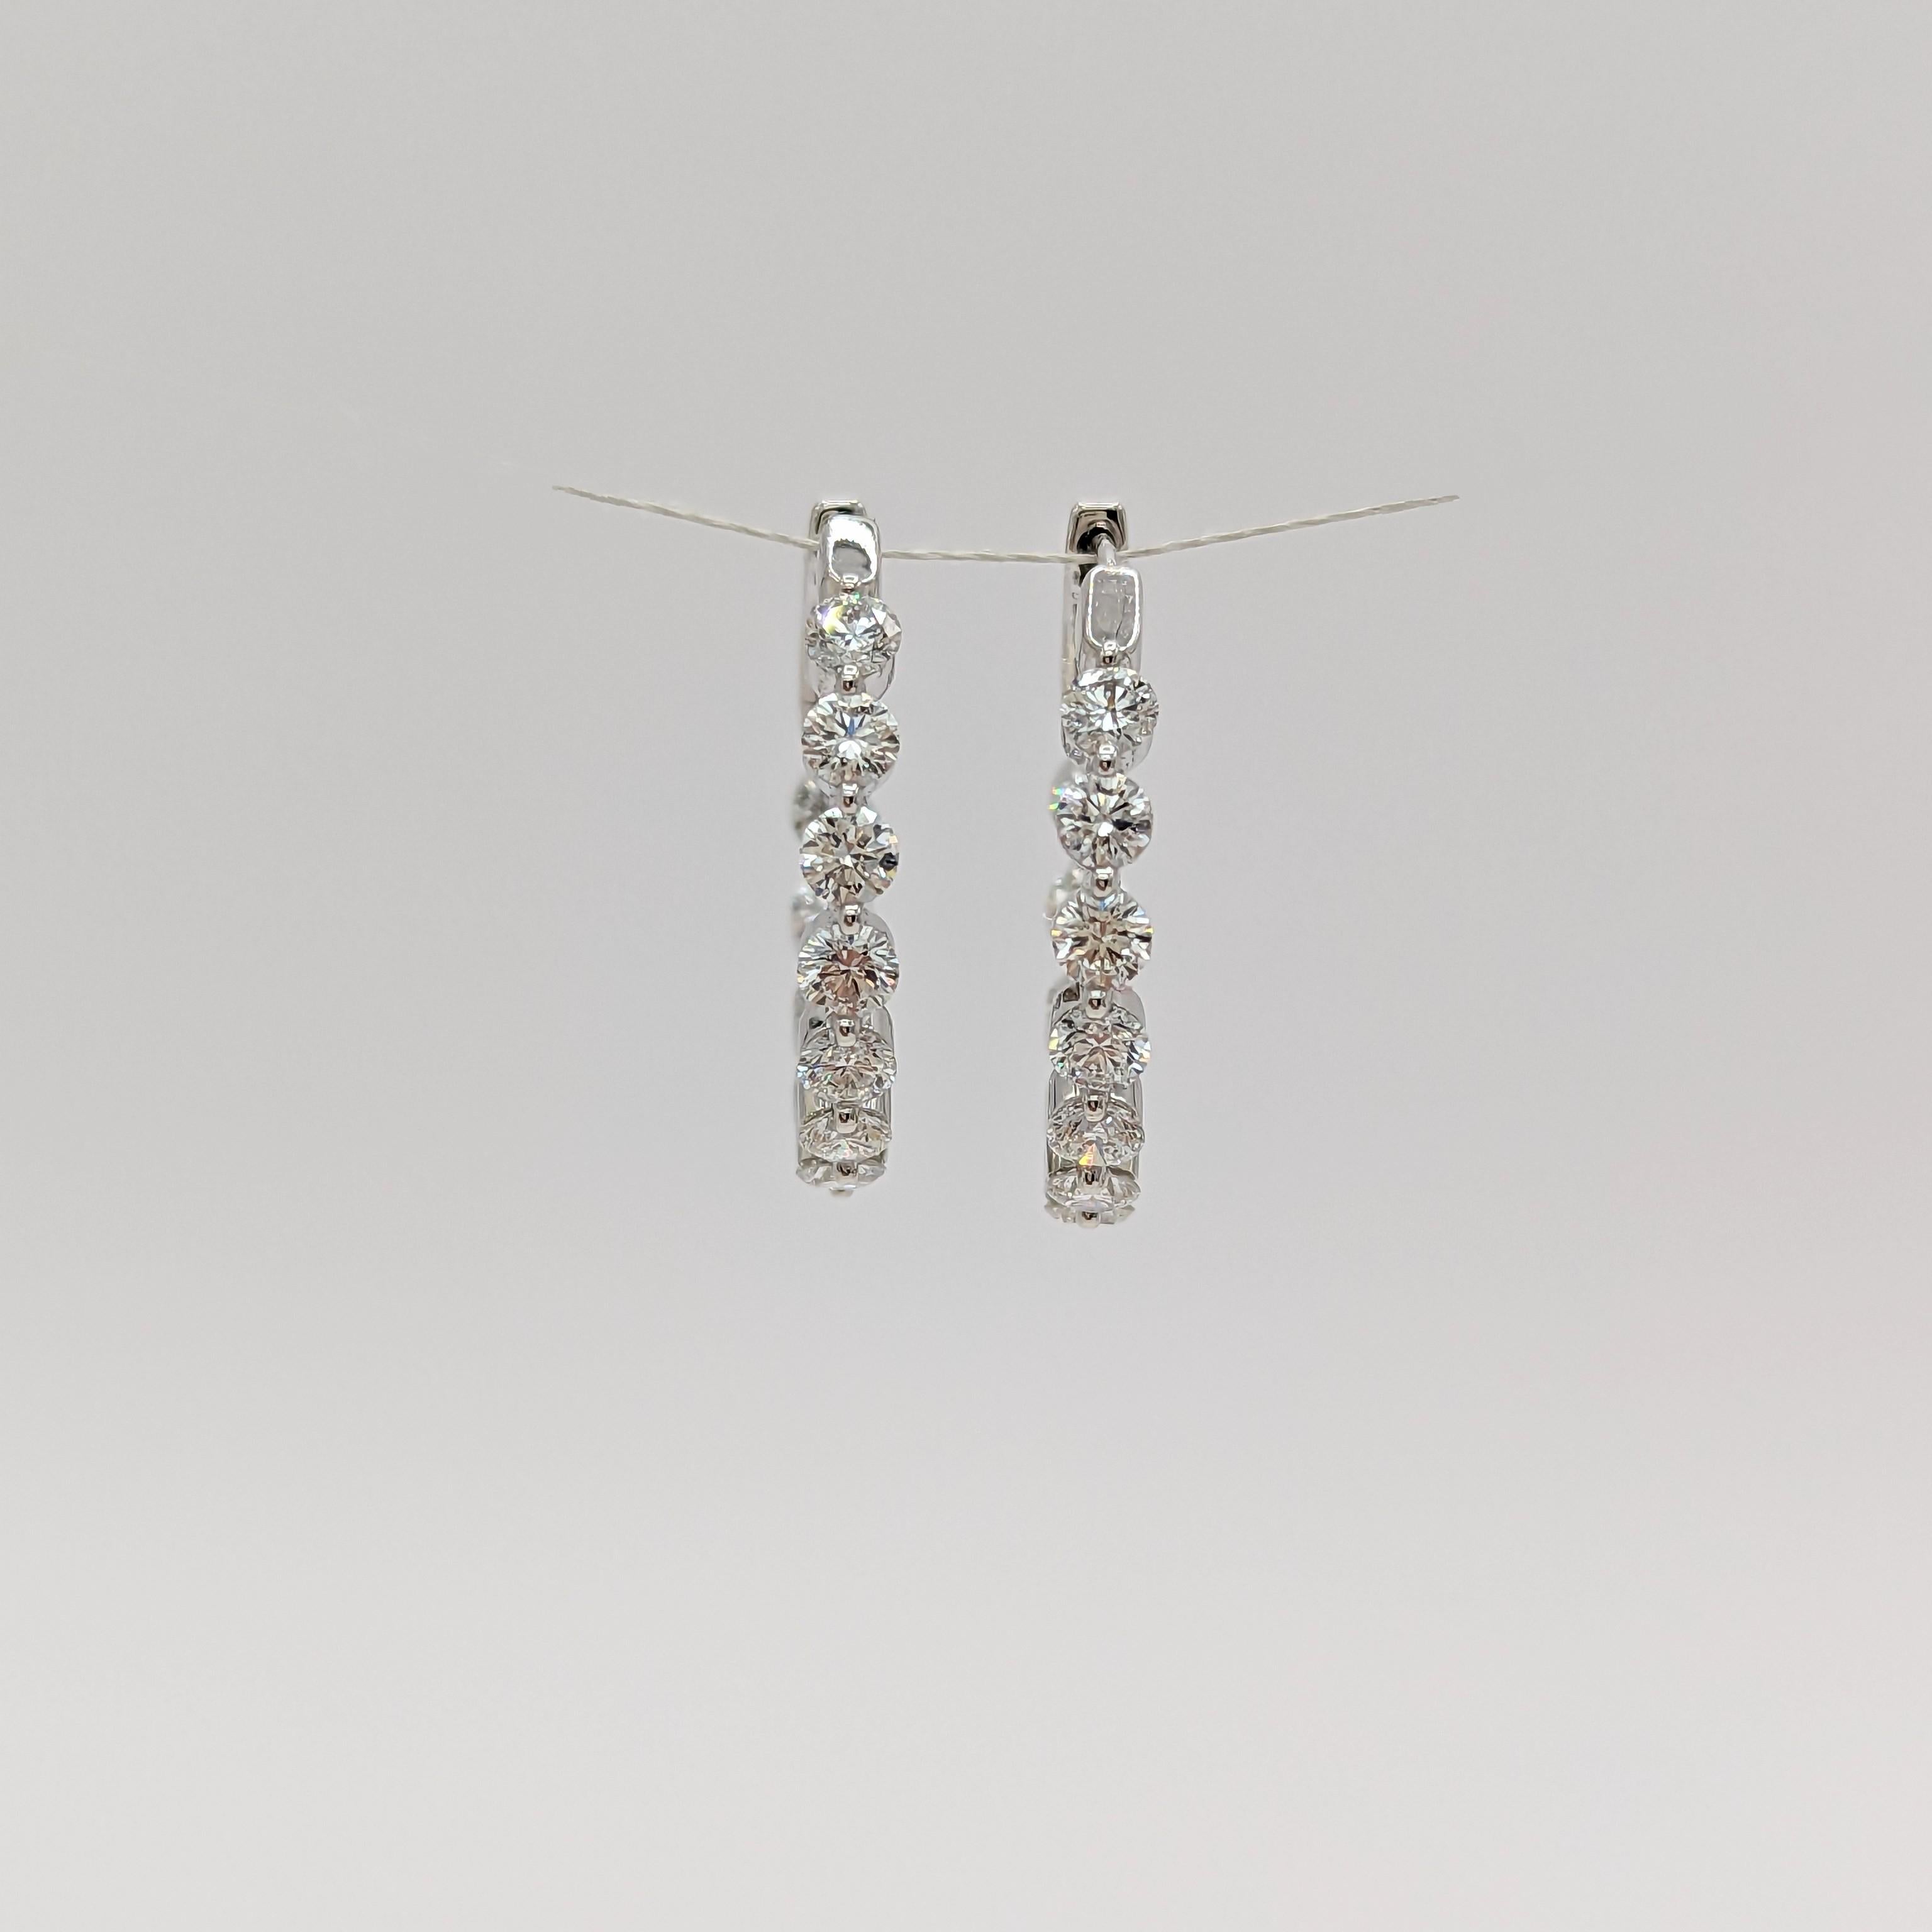 Beautiful hoop earrings with 3.23 ct. white diamond rounds.  Handmade in 18k white gold.  Diamonds are set inside and outside, giving the hoops a more elevated look.